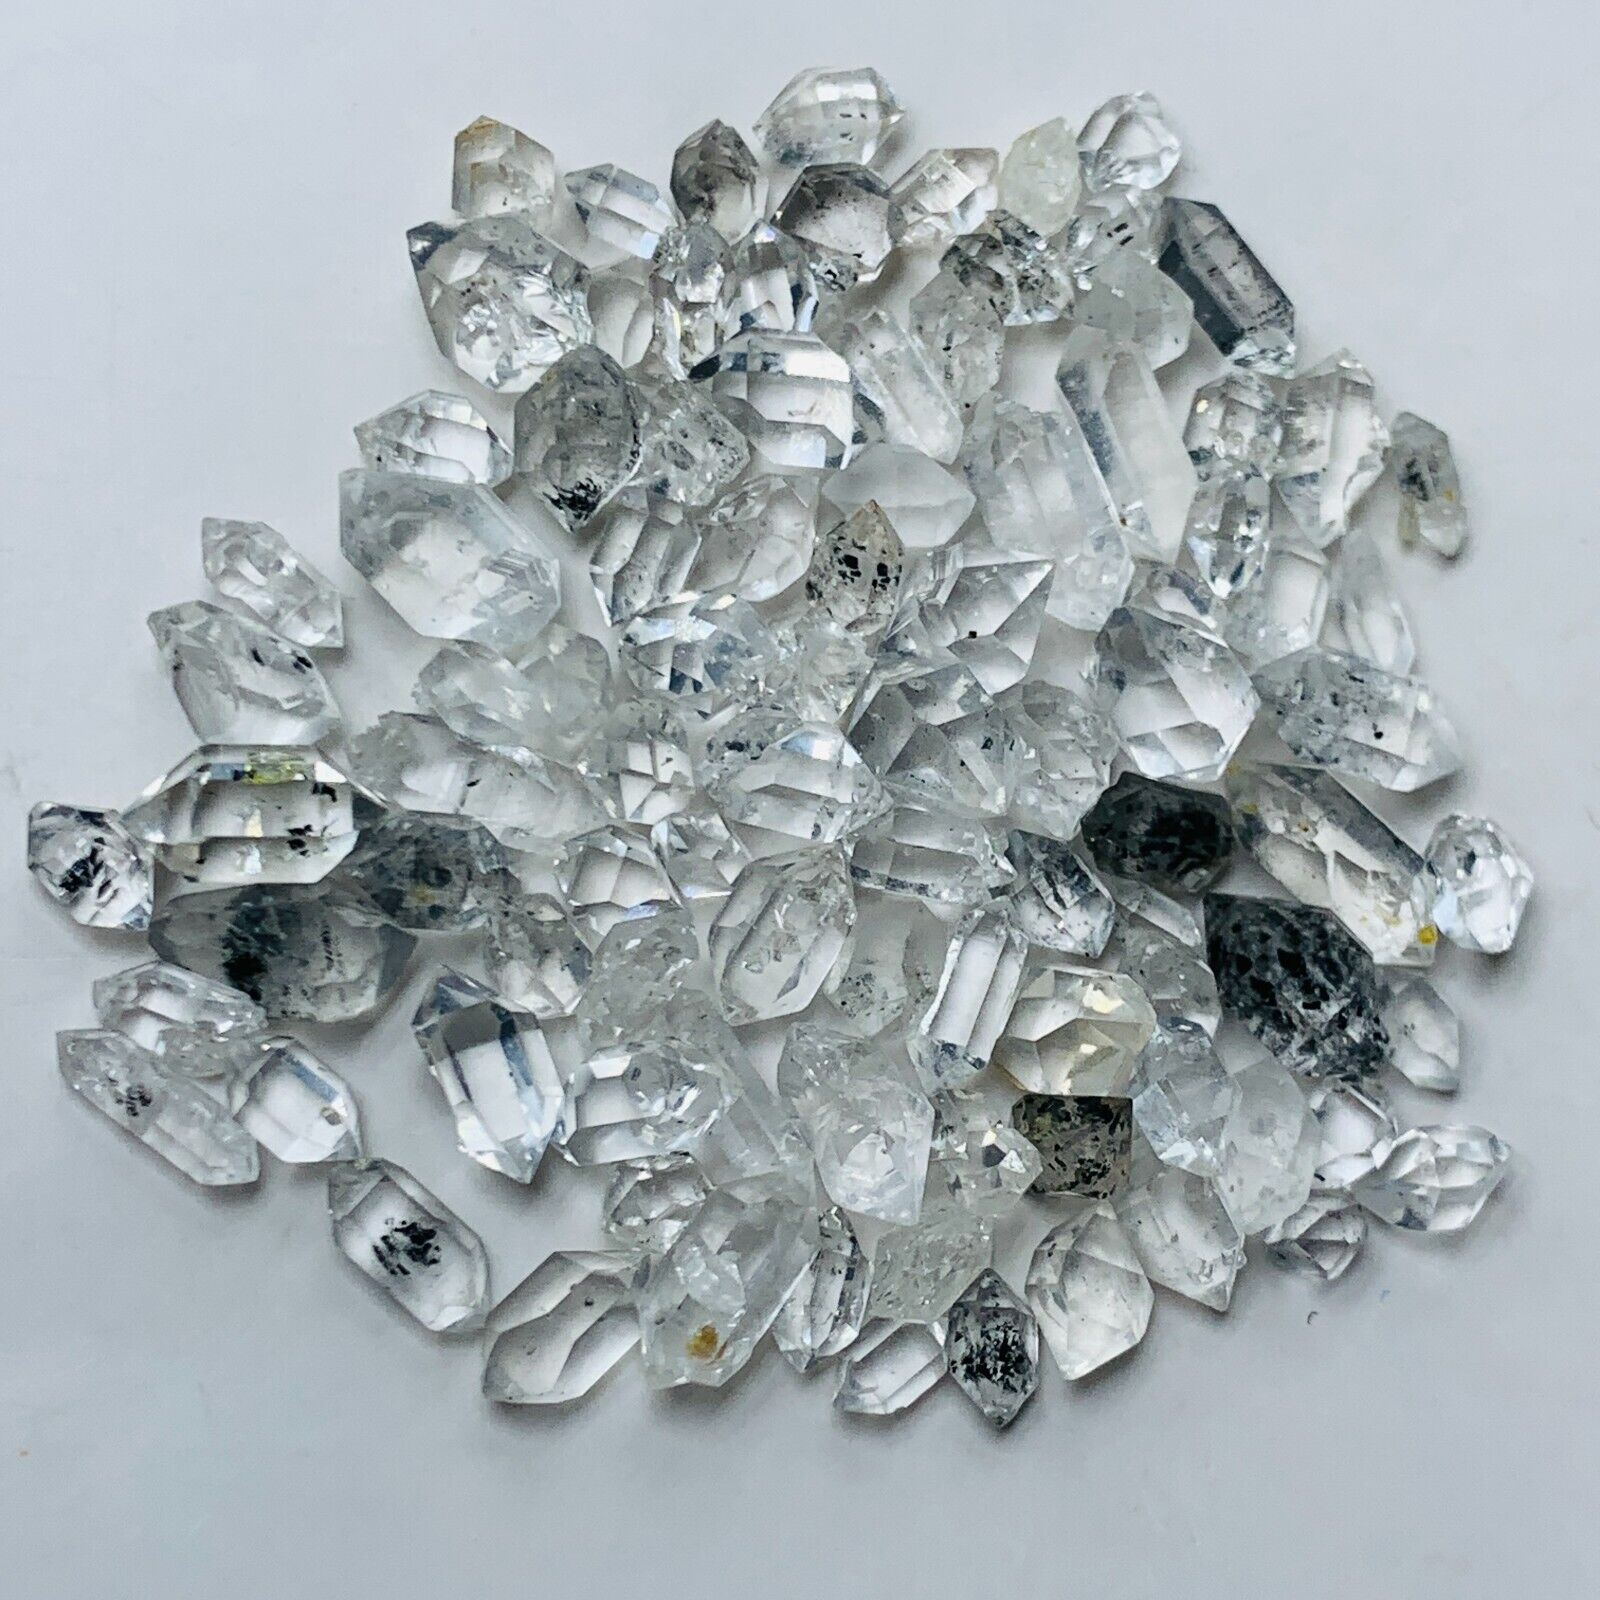 95pc Herkimer Diamond AAA small 5mm to 10mm Top gem crystal From-NY 48ct